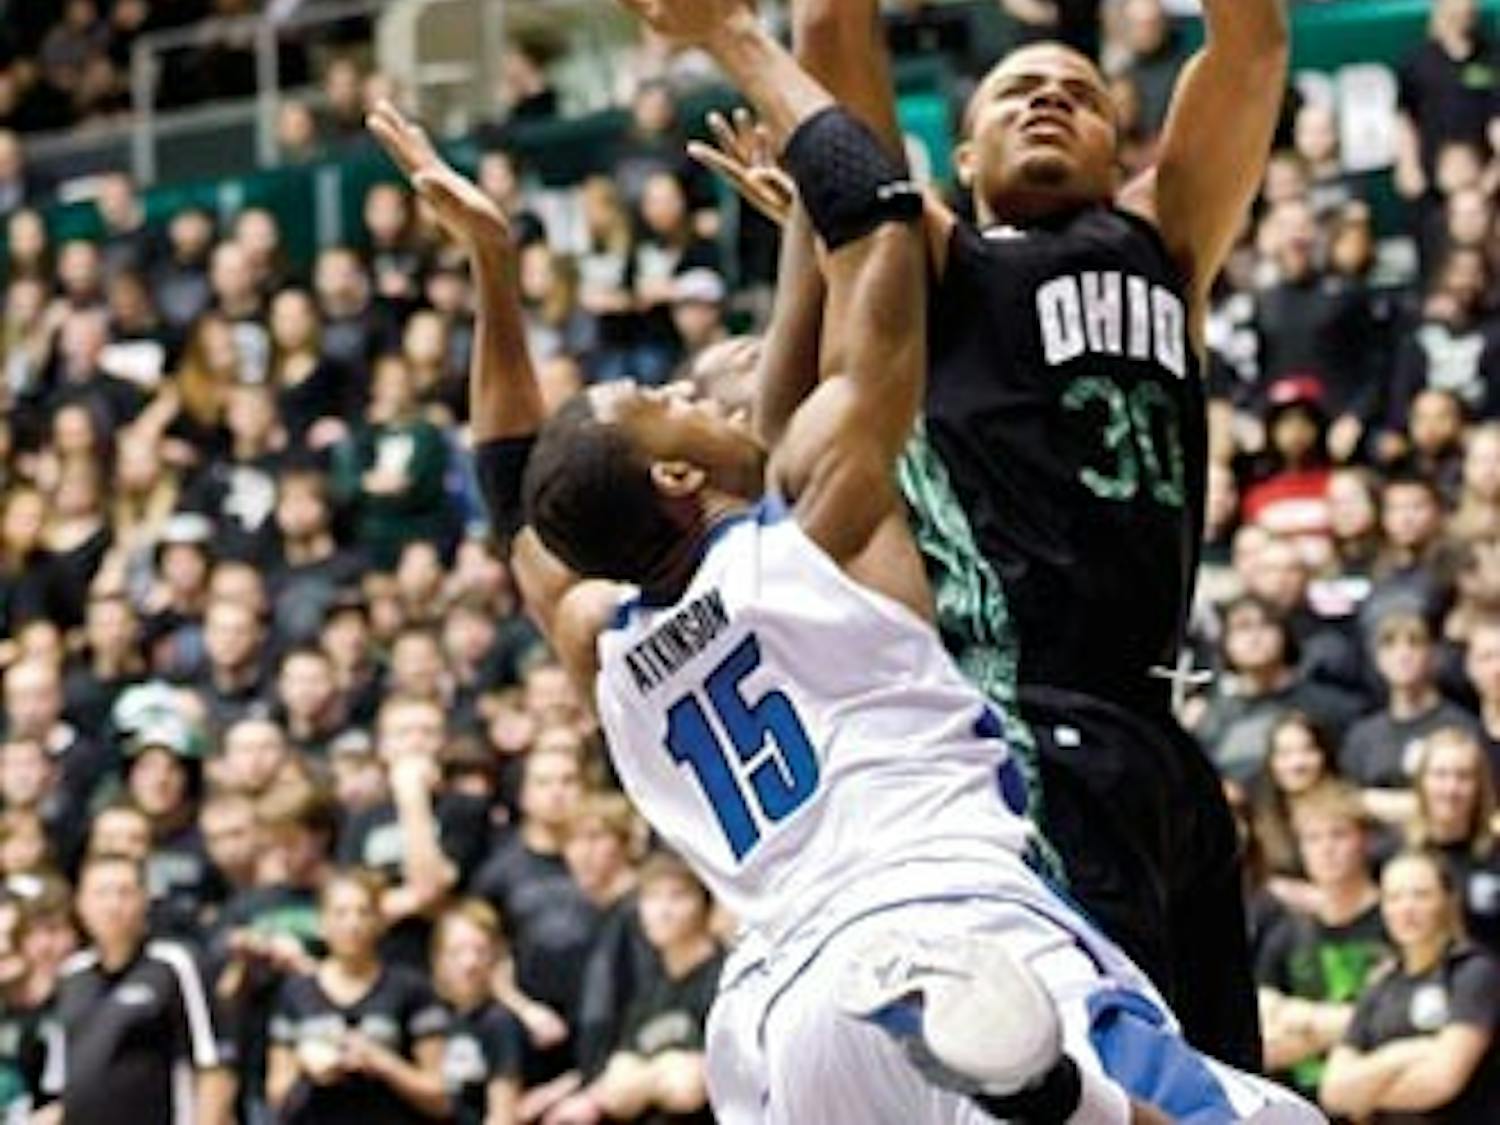 Men's Basketball: Ohio hopes to grab bull by horns, climb to third place in MAC East  